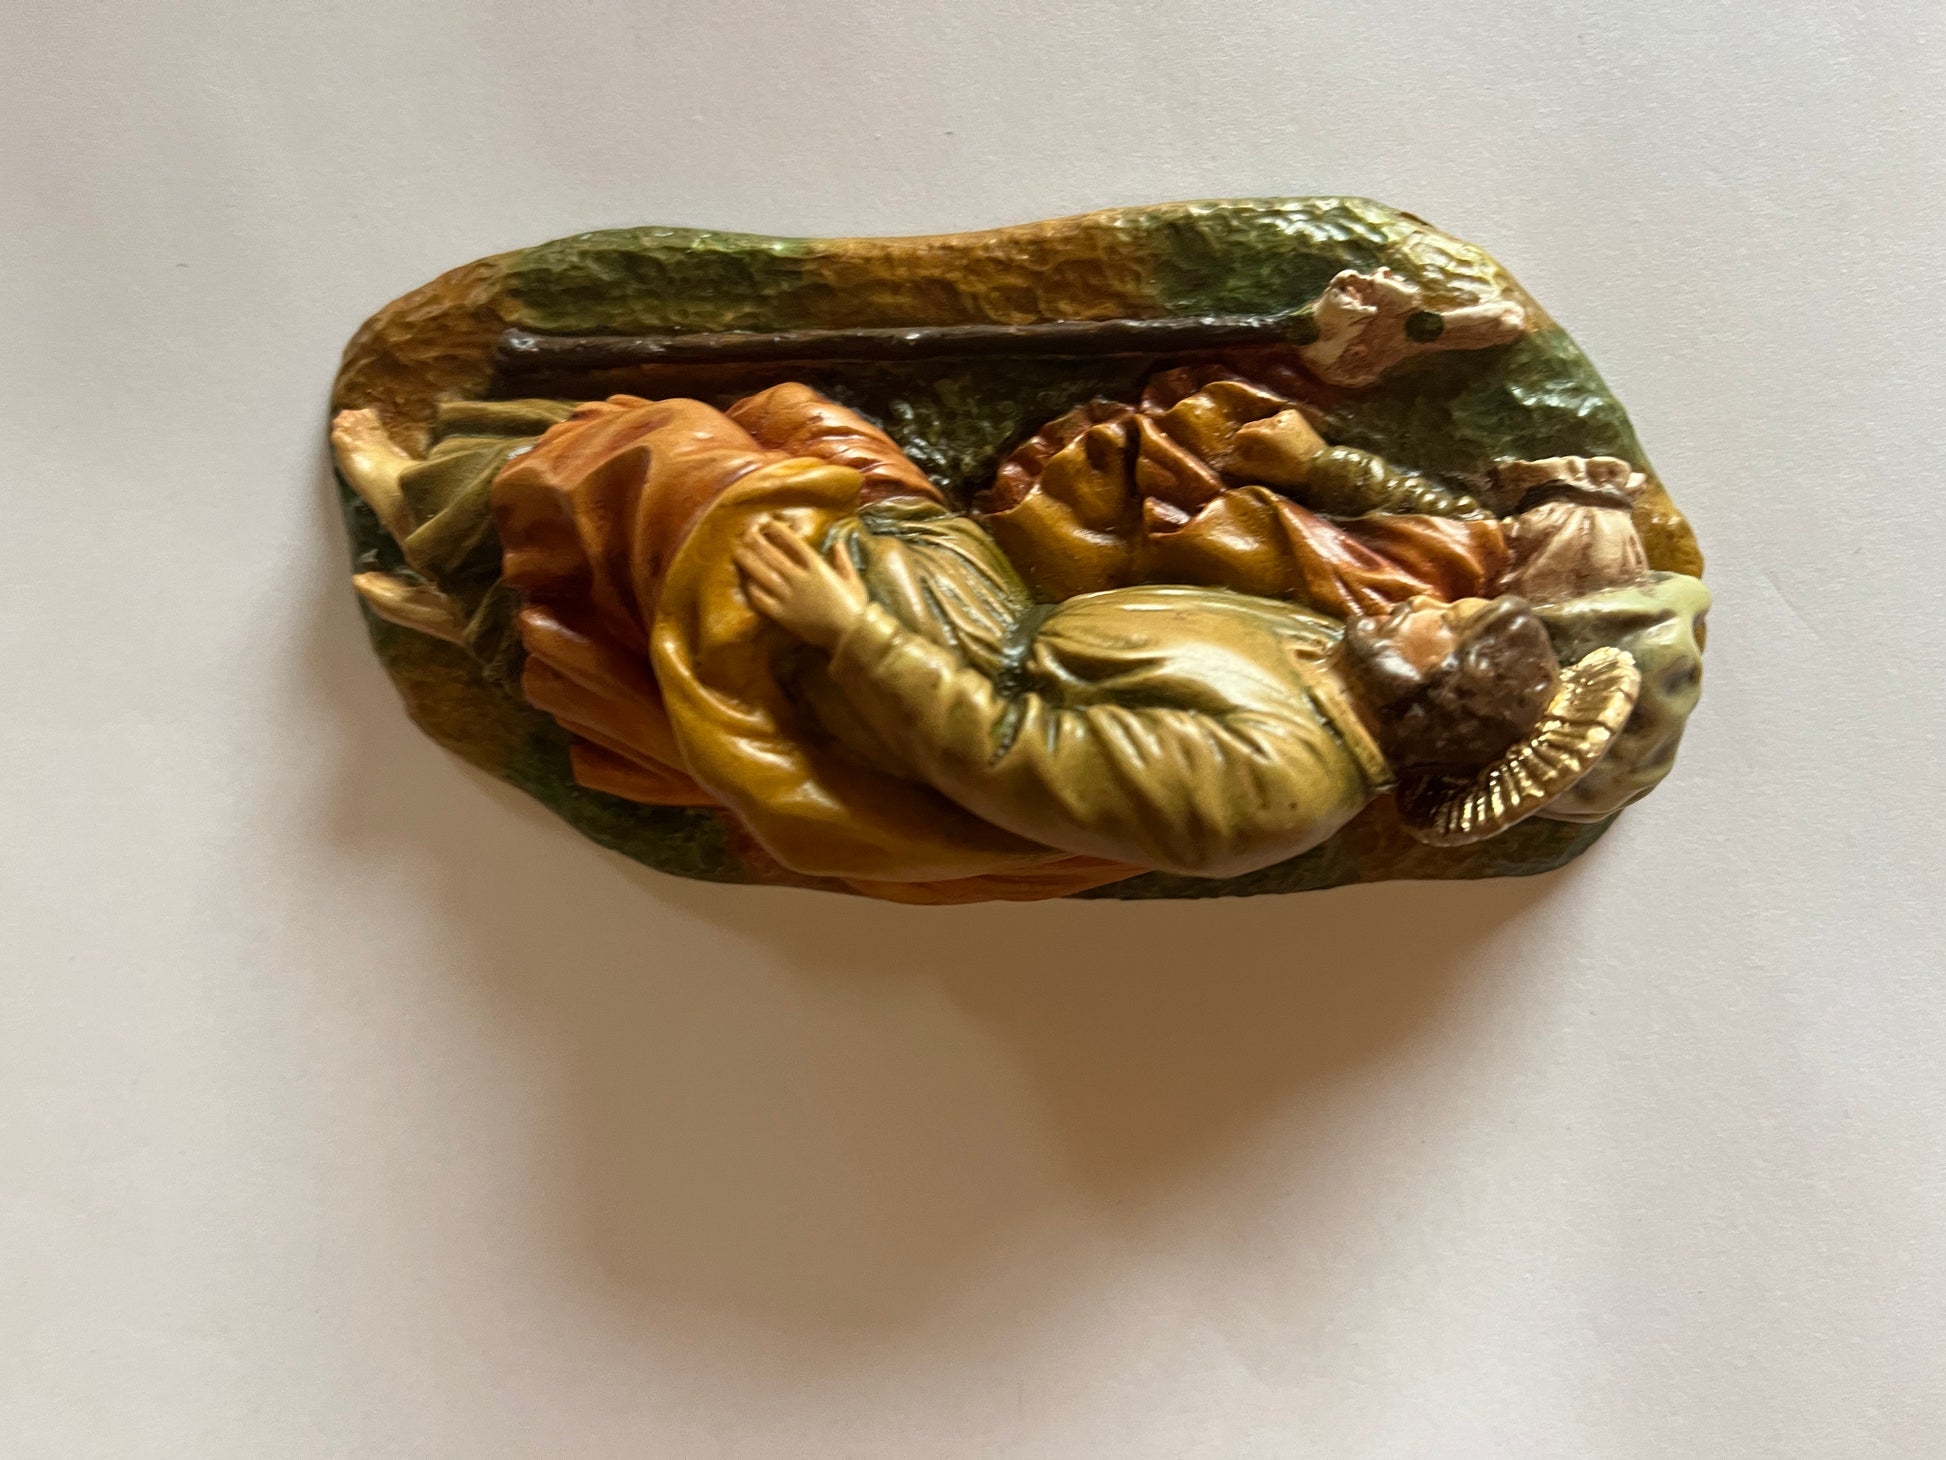 Sleeping Saint Joseph Statue 5 Inch hand painted in Colombia - Bob and Penny Lord